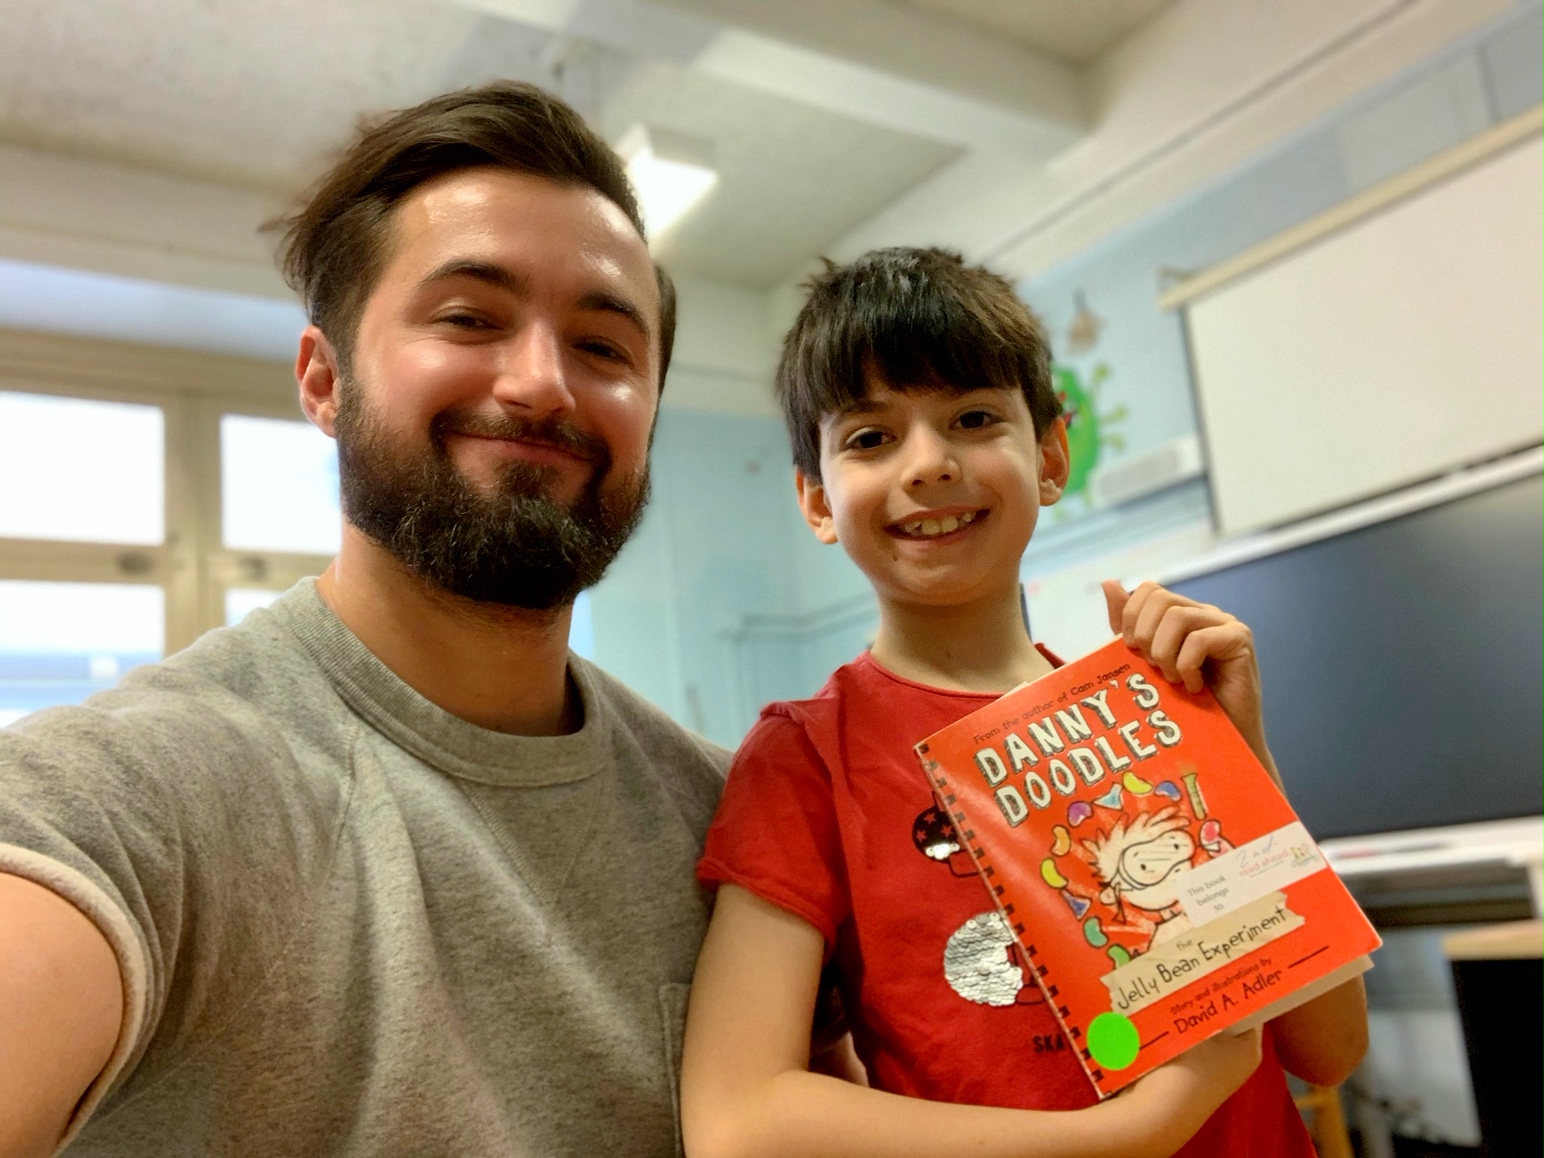 My friend Andrew and his reading buddy, Kayvan